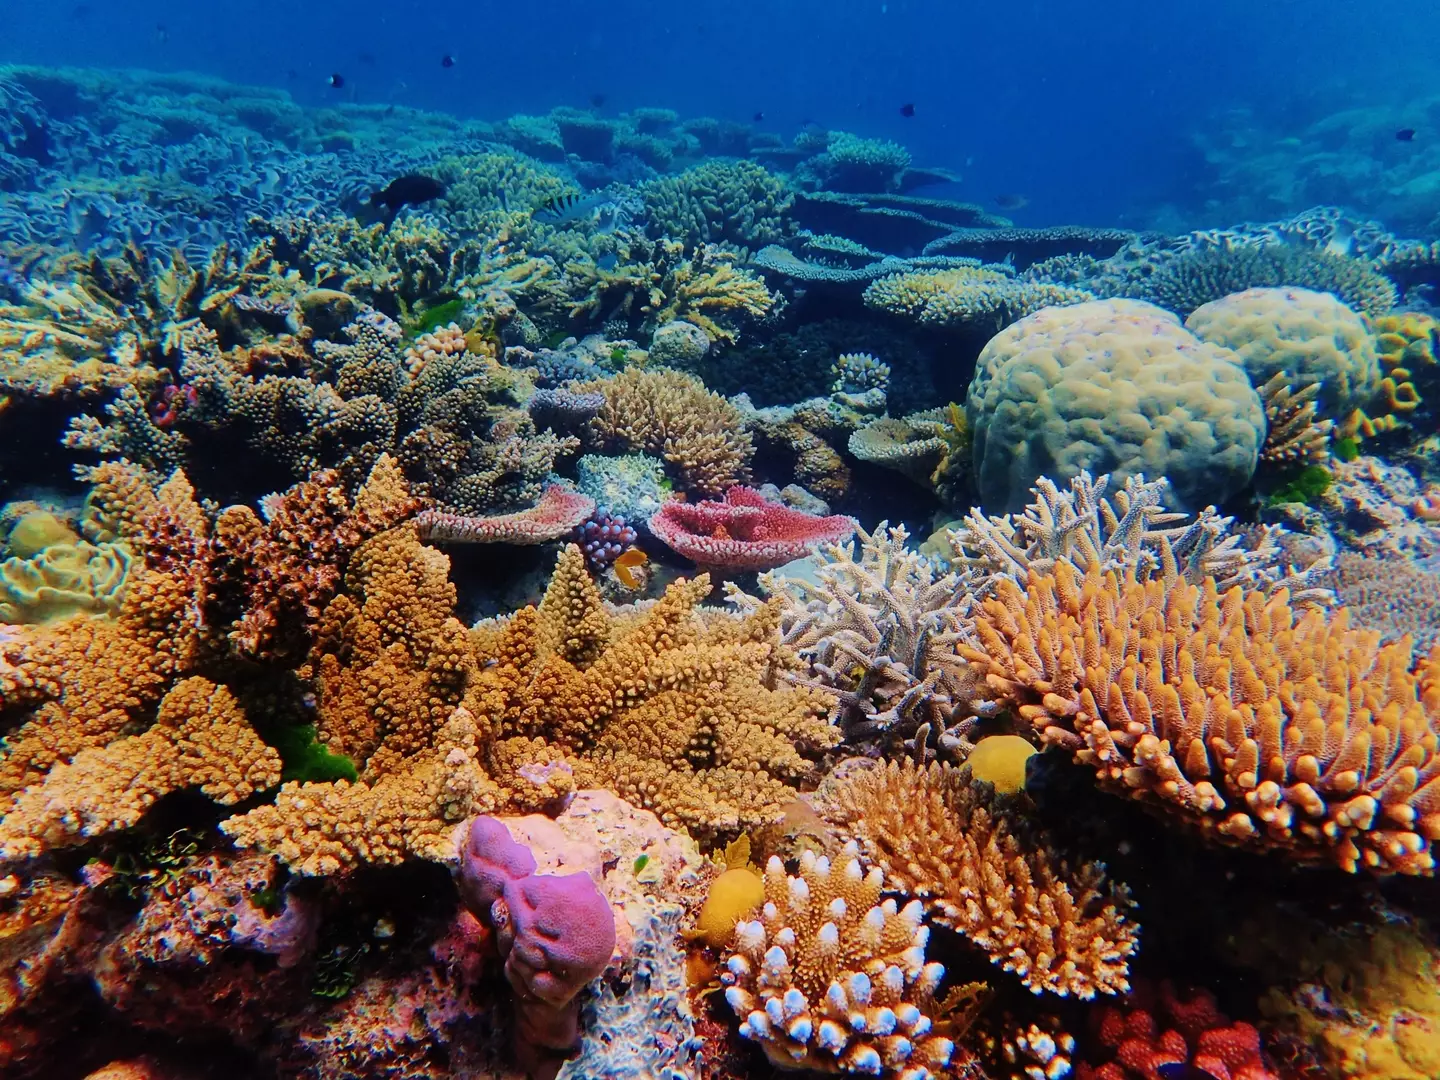 The Great Barrier Reef boasts rainbow coloured corals and is home to an array of marine life.